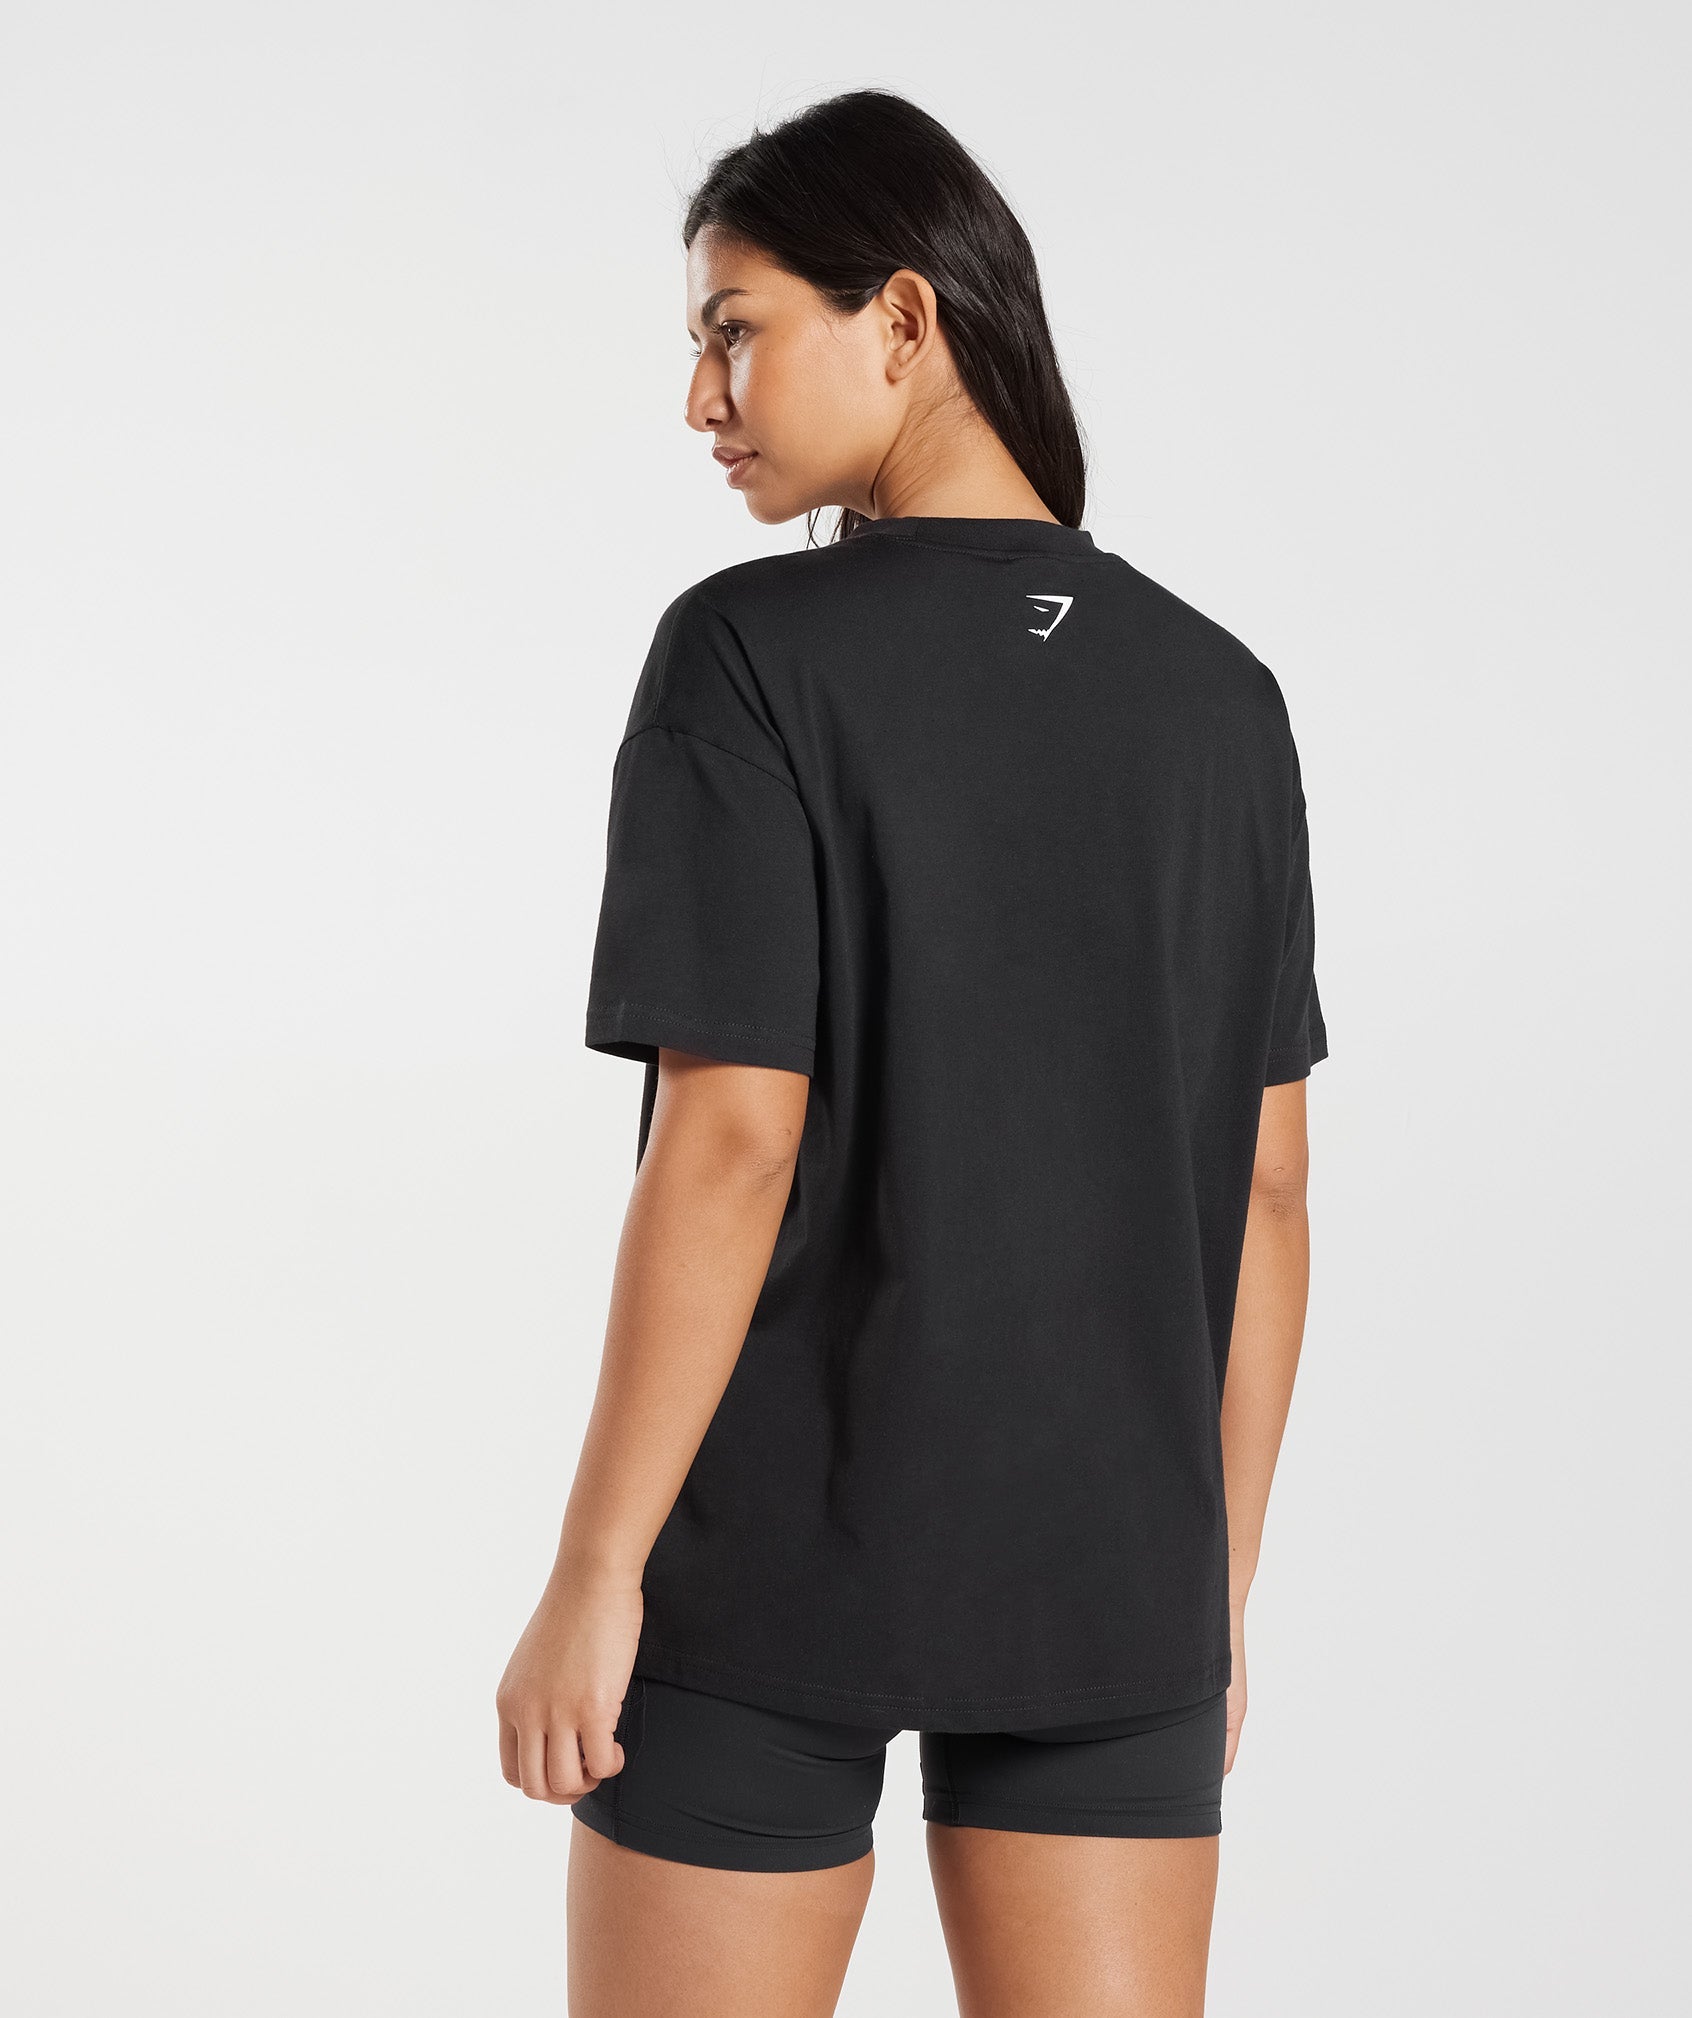 GS Fuel Oversized T-Shirt in Black - view 3